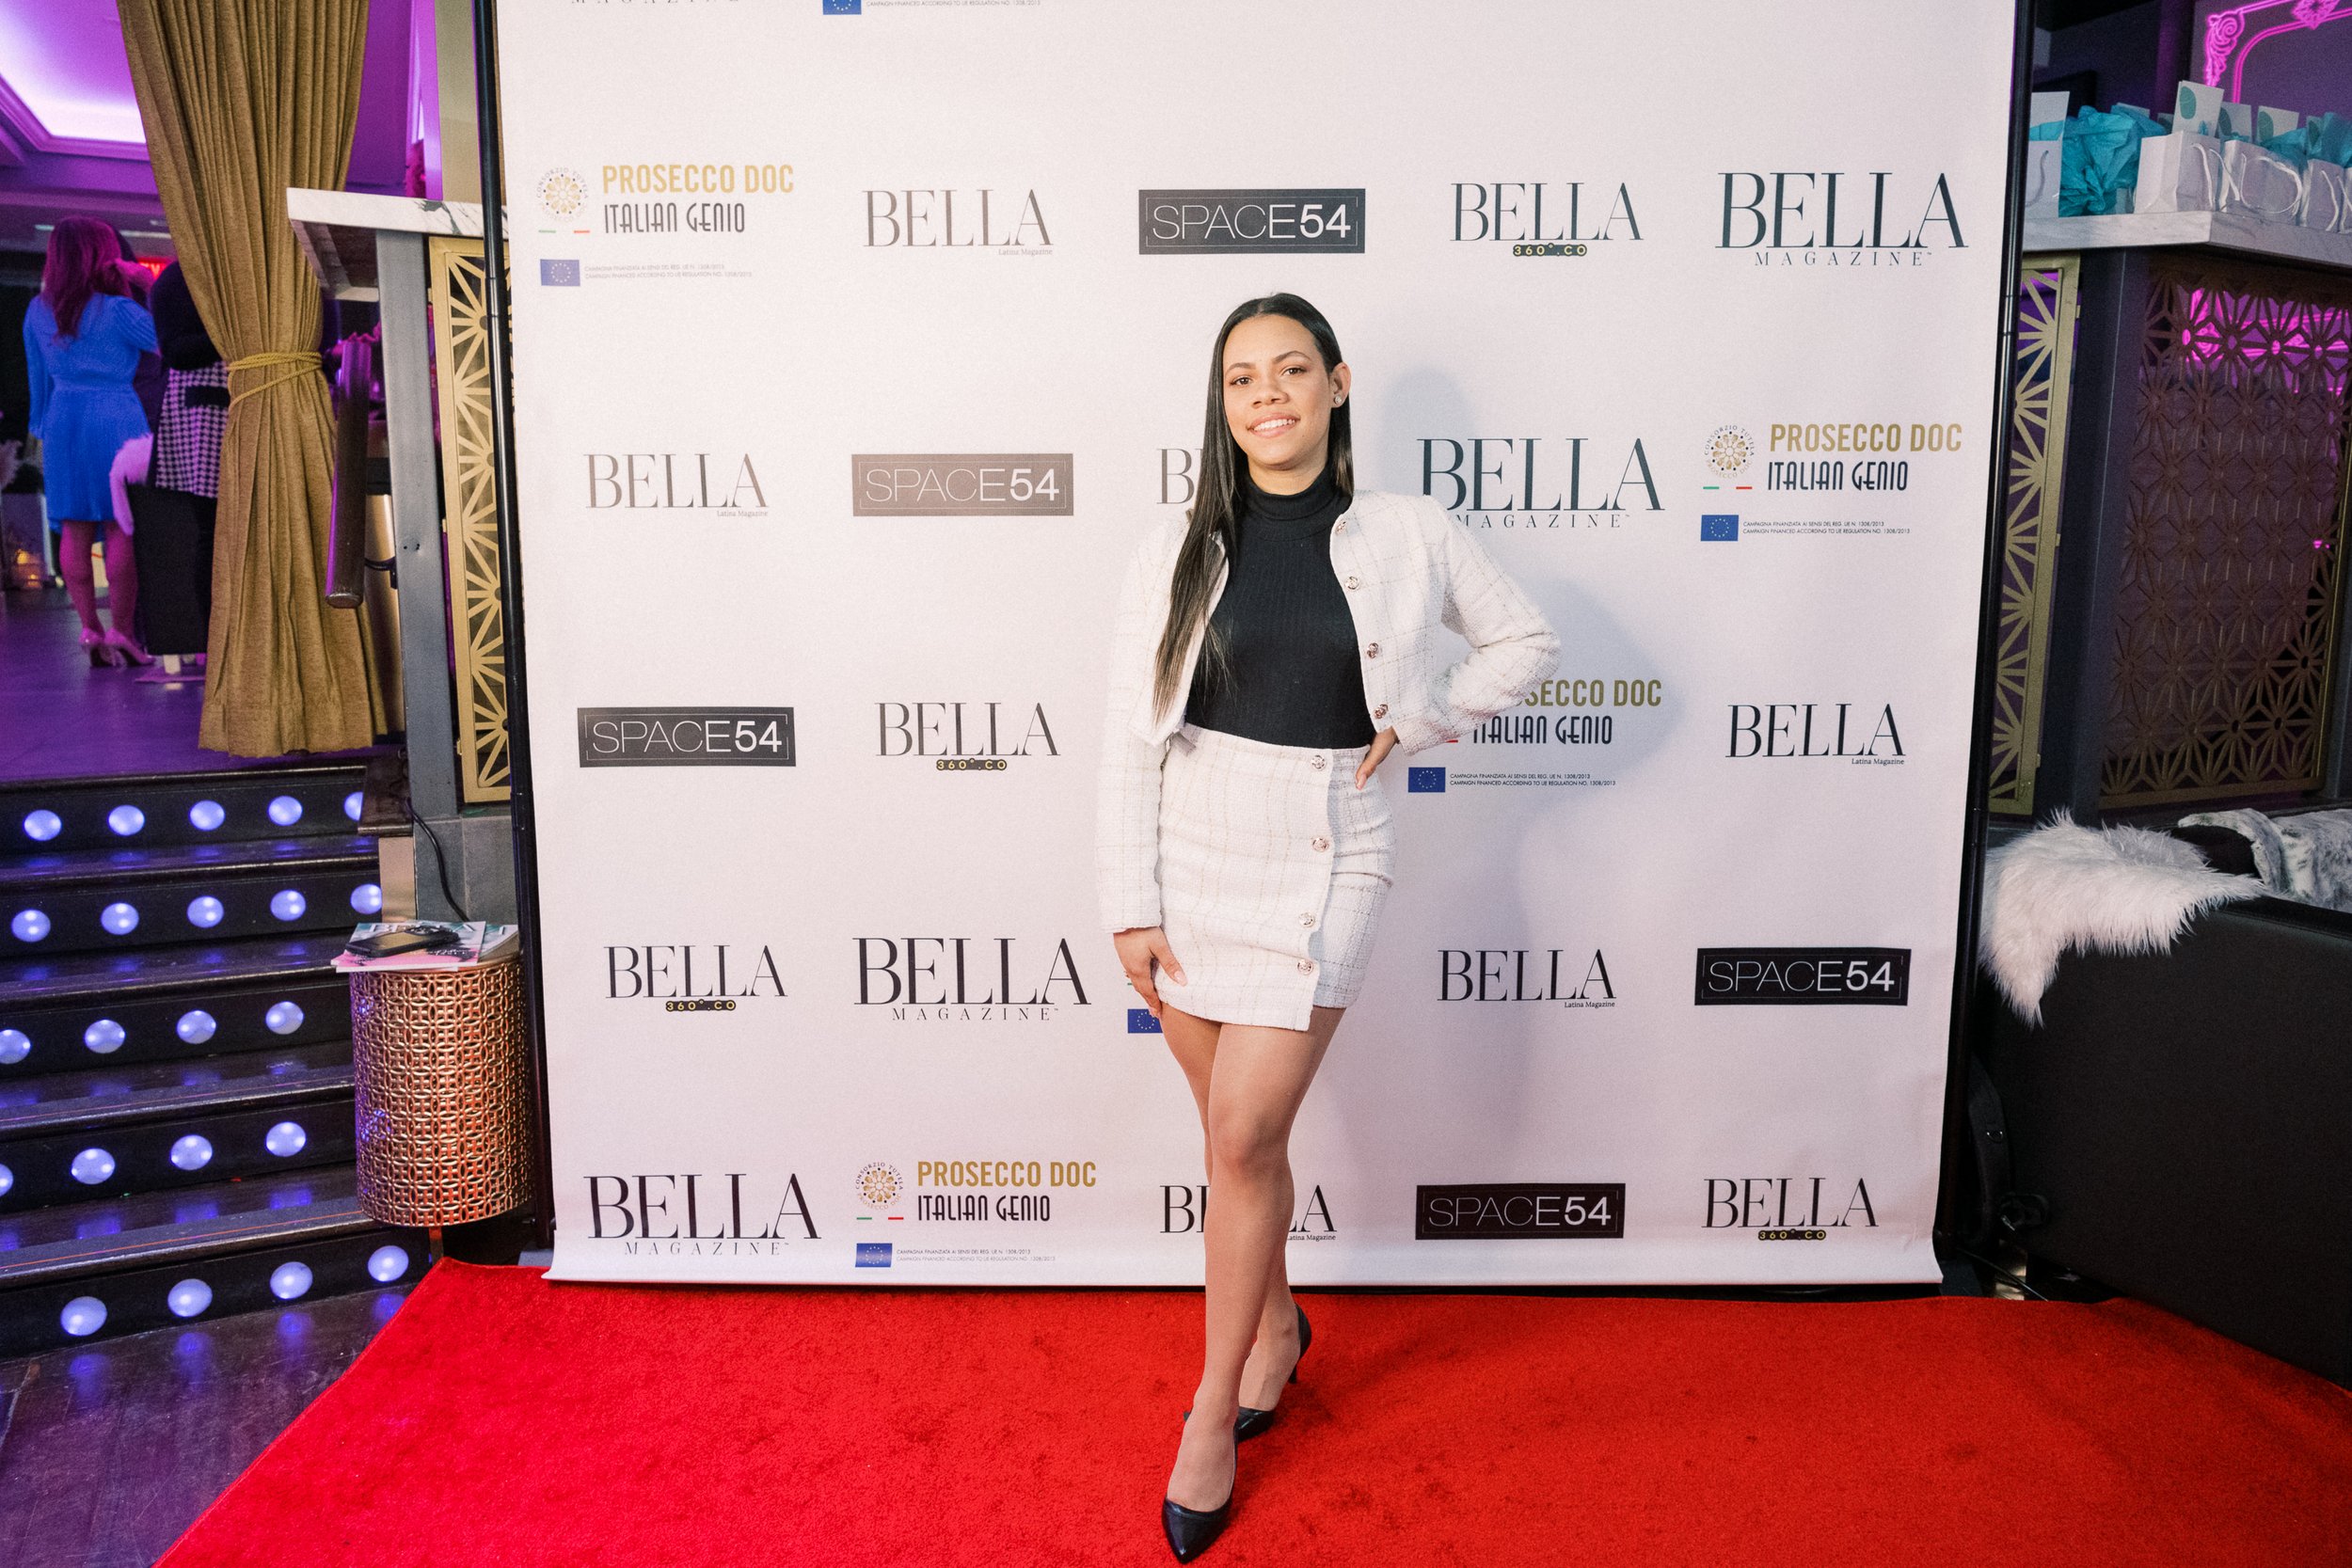 Michelle-Behre-Creative-Co-BELLA-Magazine-Co-Women-of-Influence-Cover-Party-Space54-NYC-55.jpg